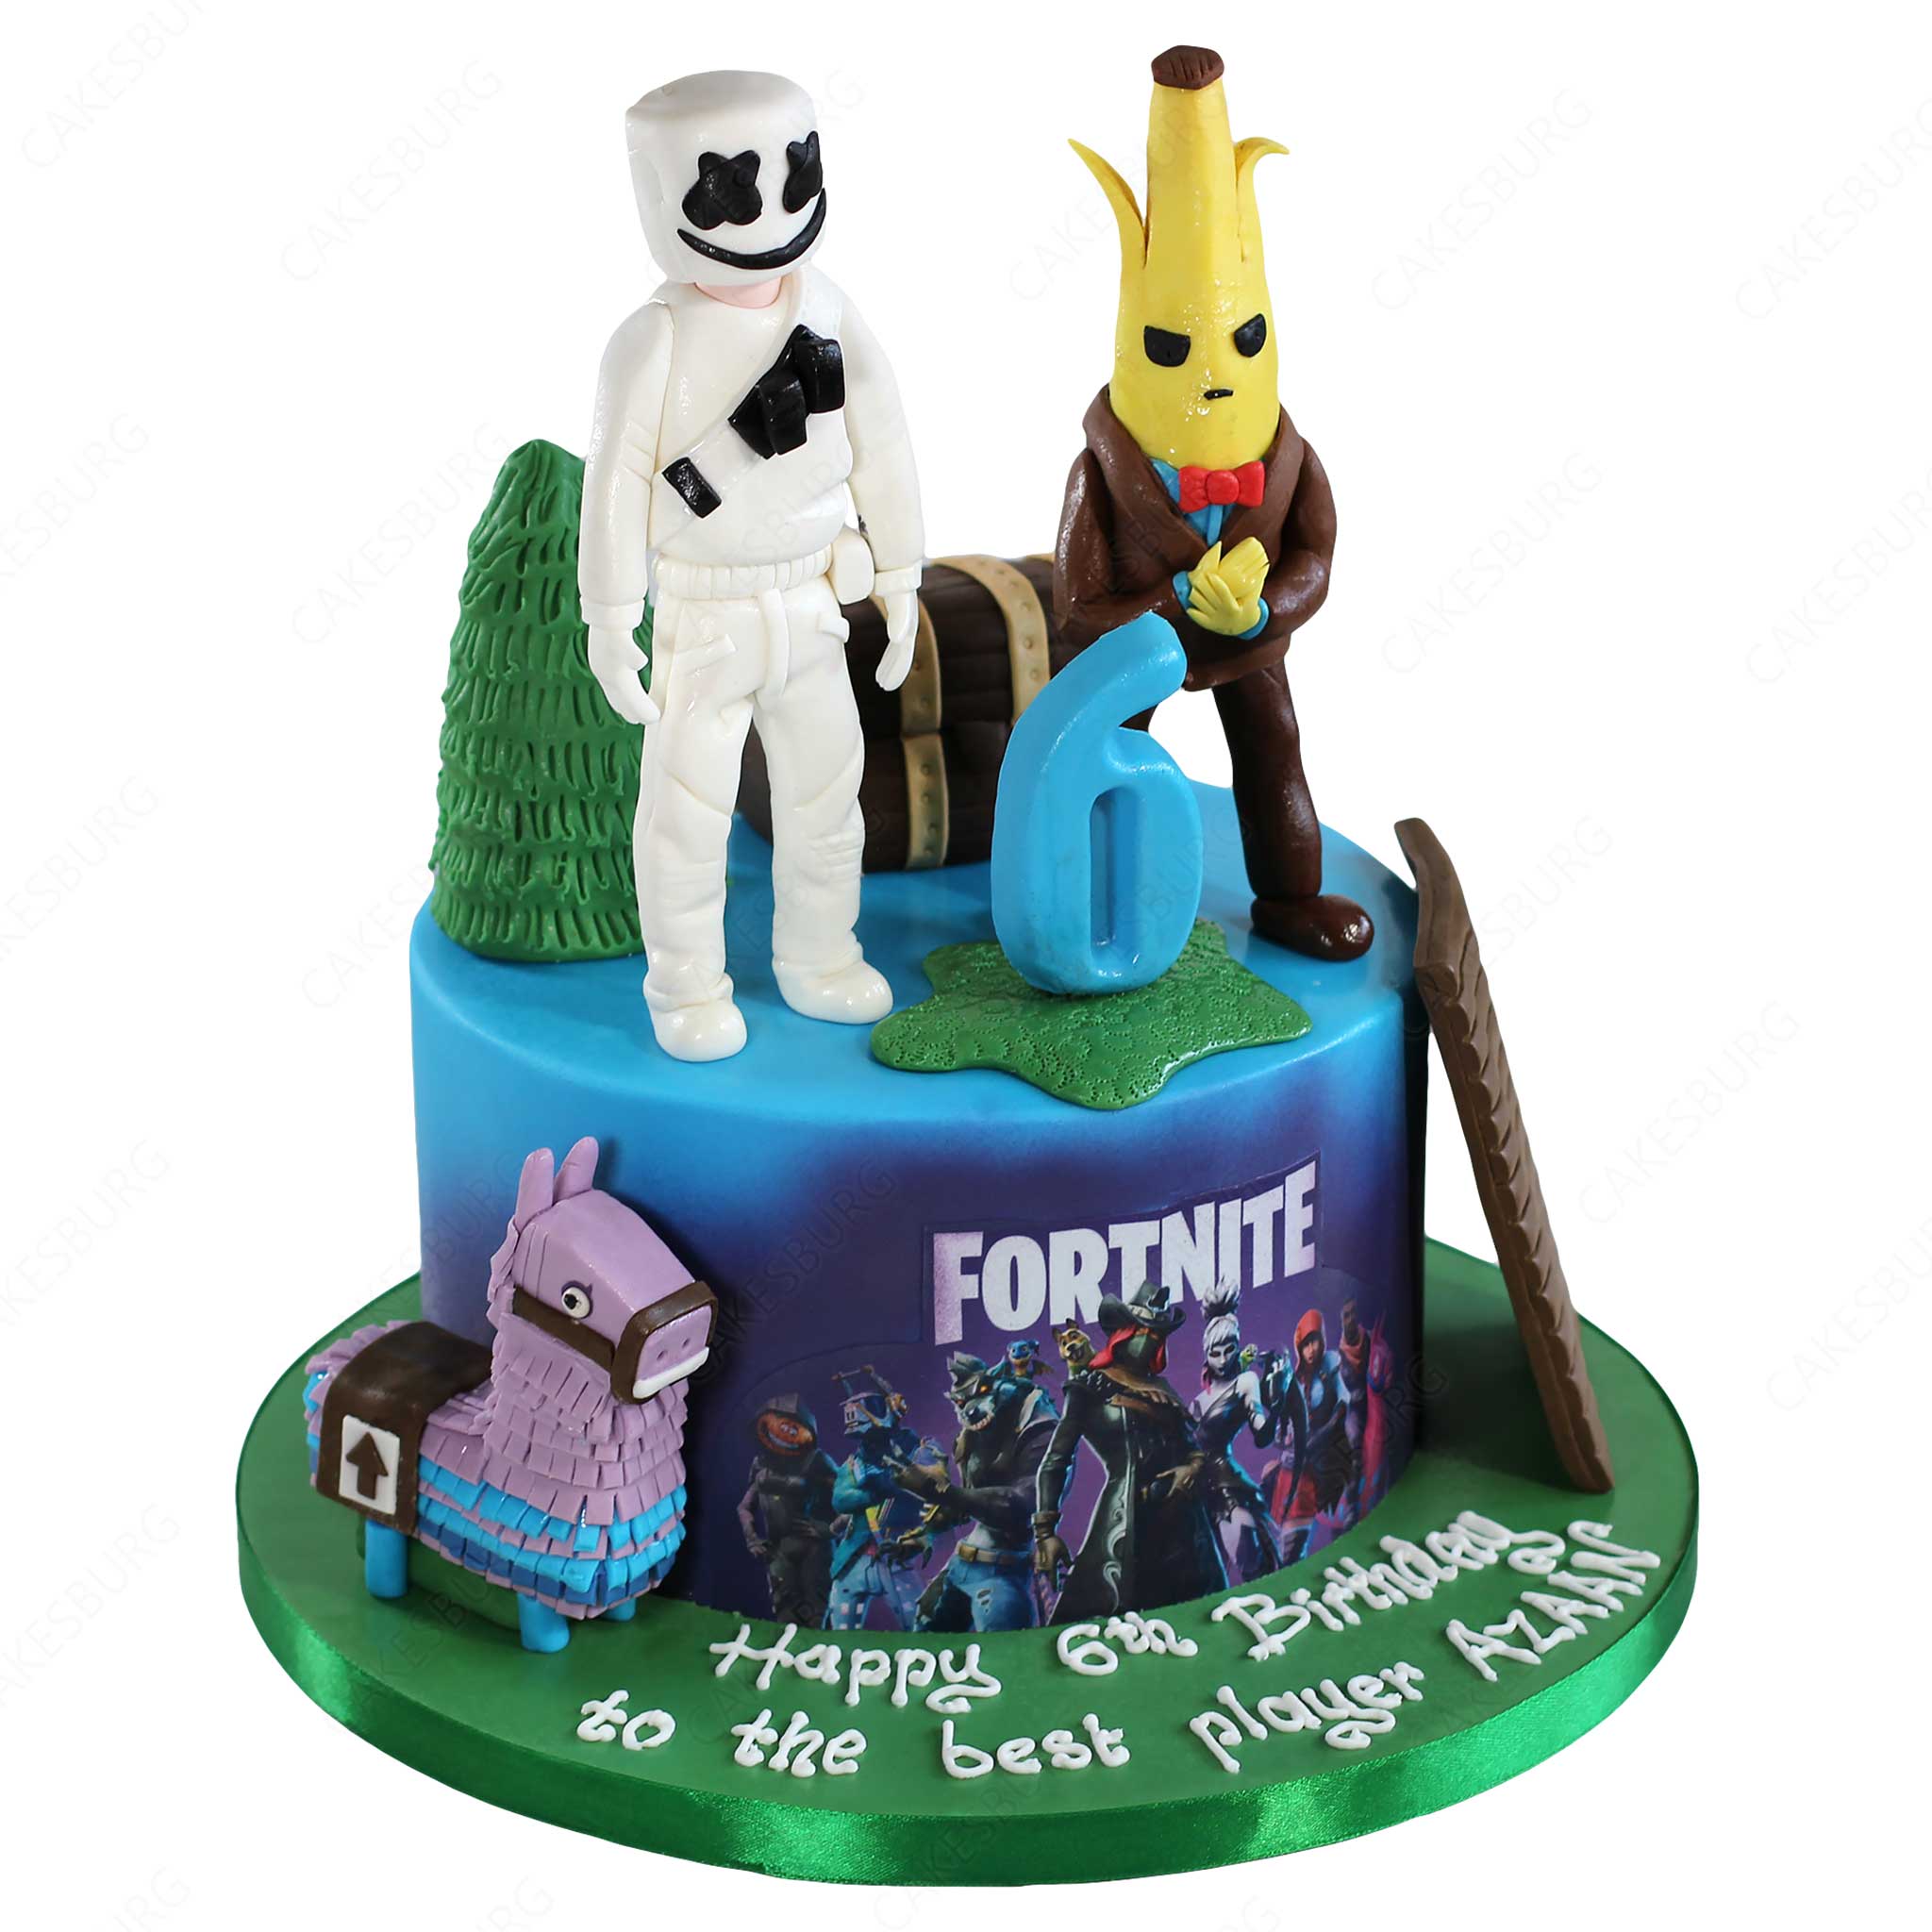 Fortnite Drop Cake – At Home With Shay gluten free